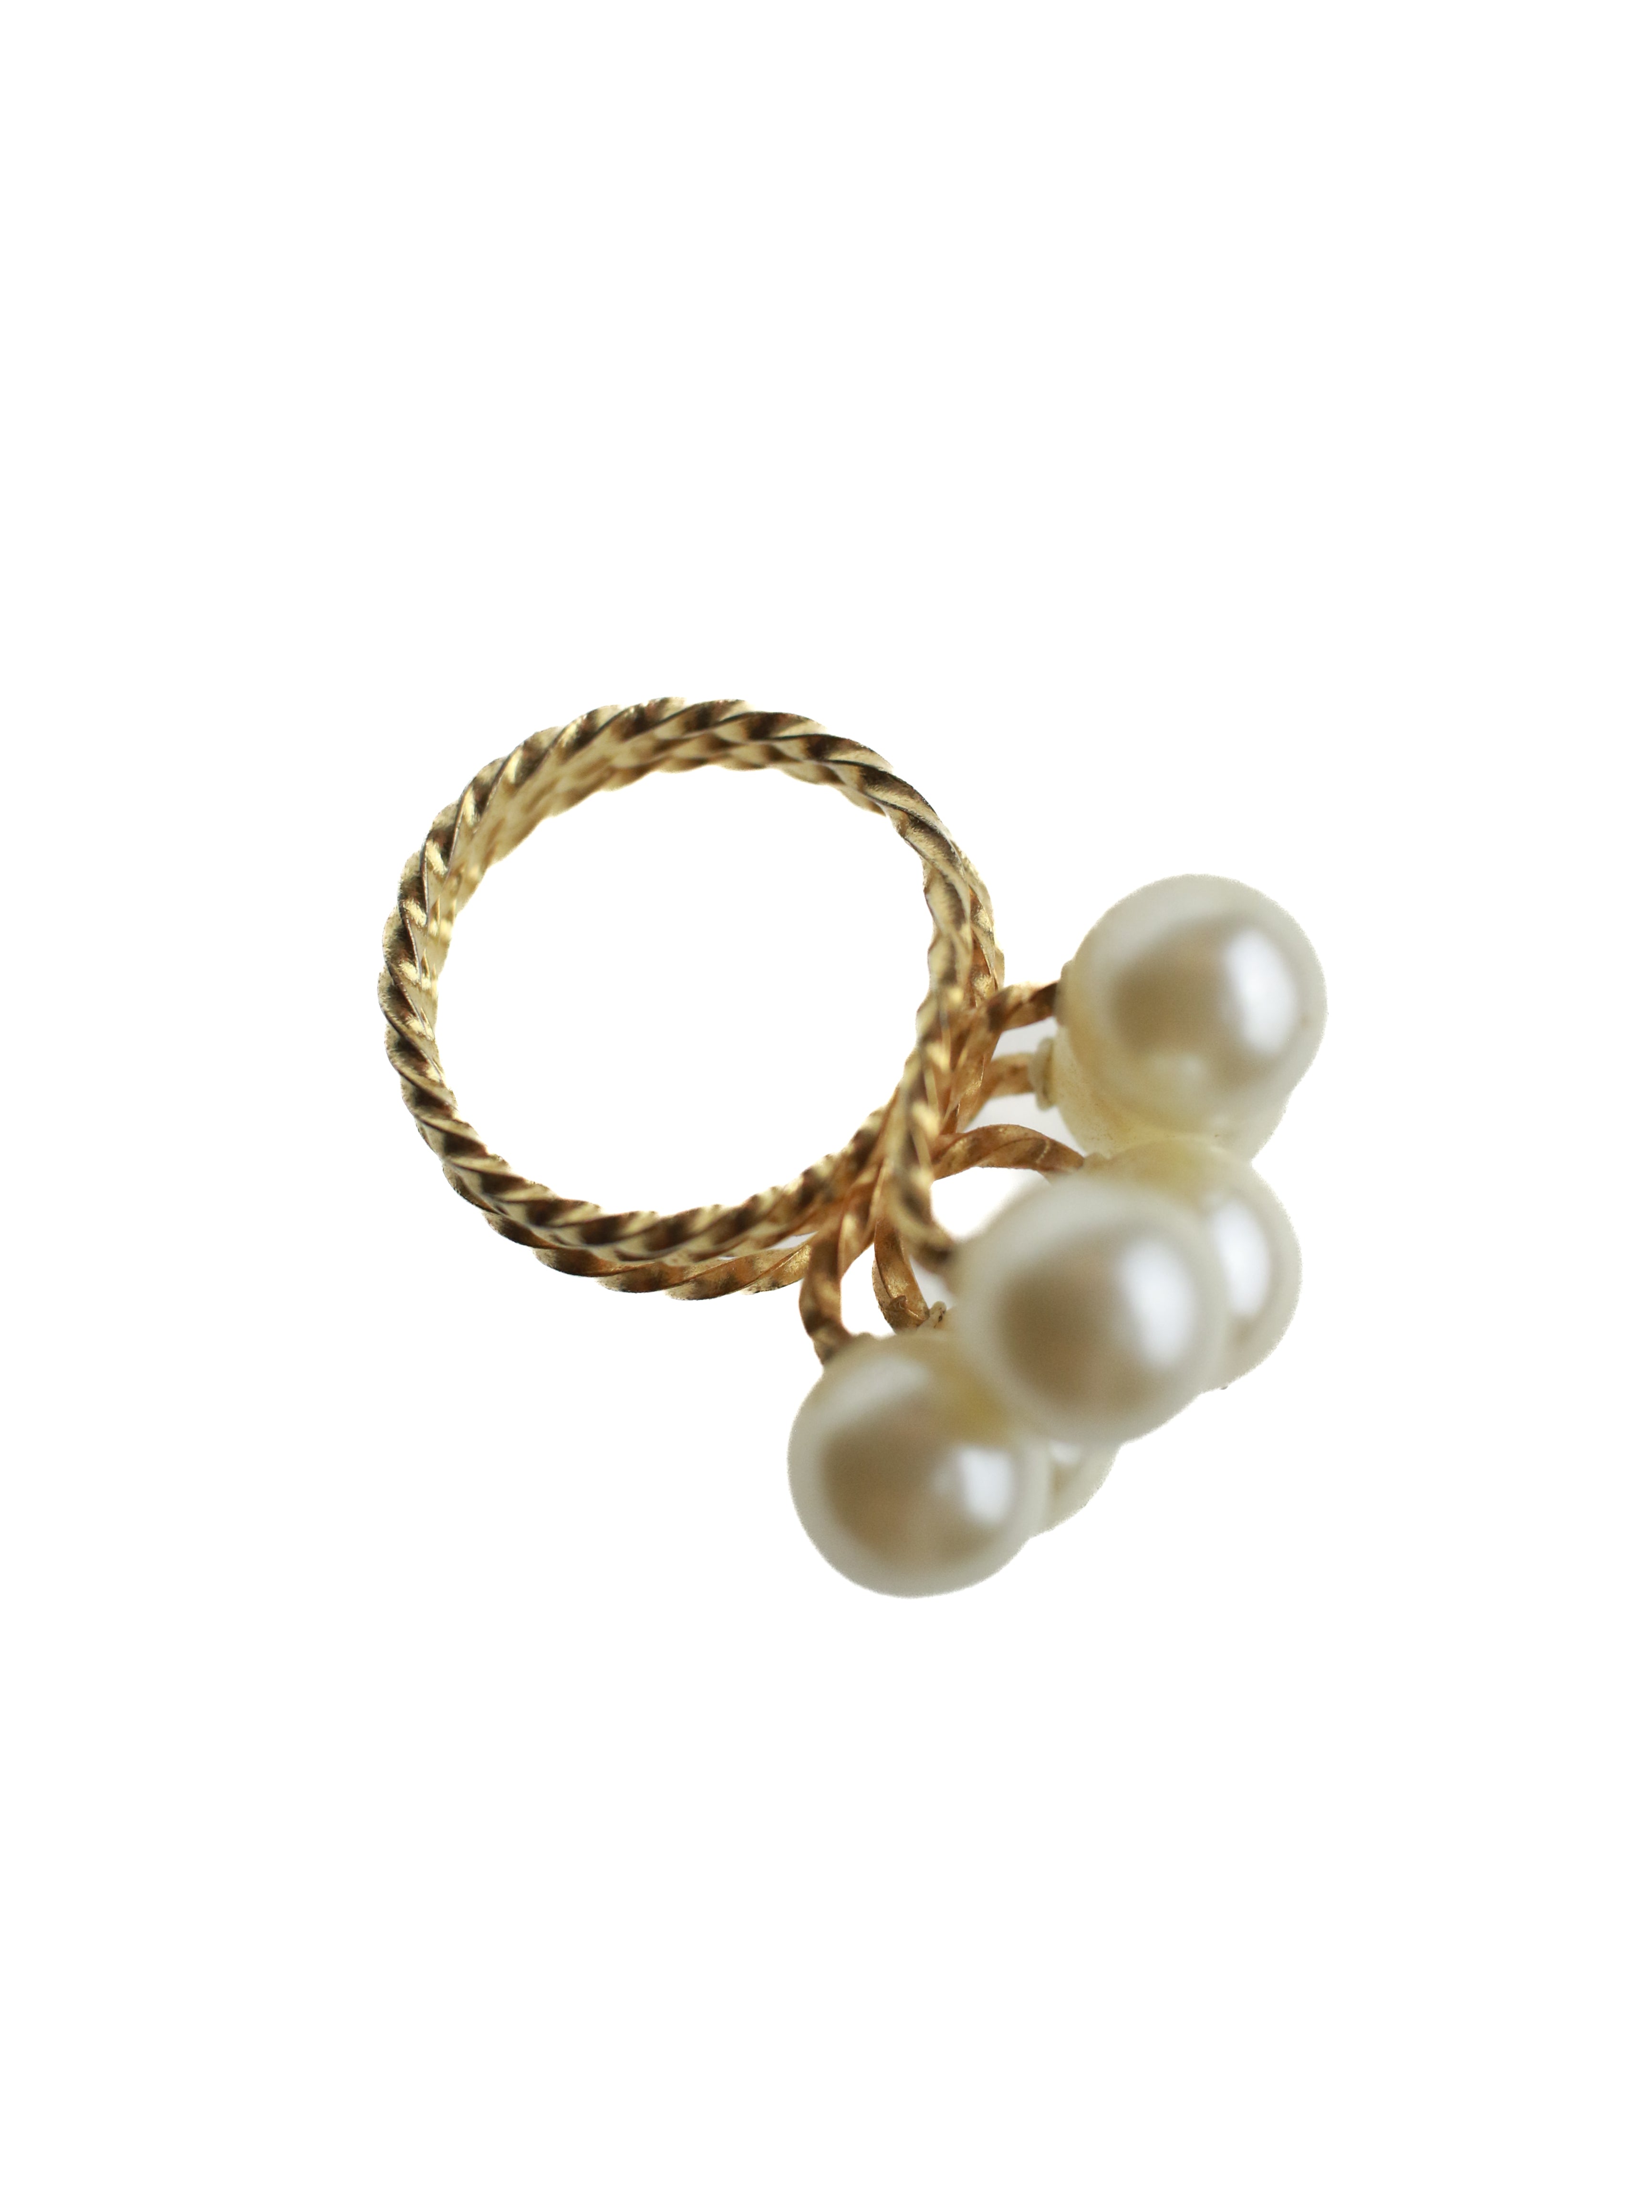 Pearl Bouquet Ring | Whit's Vintage Picks